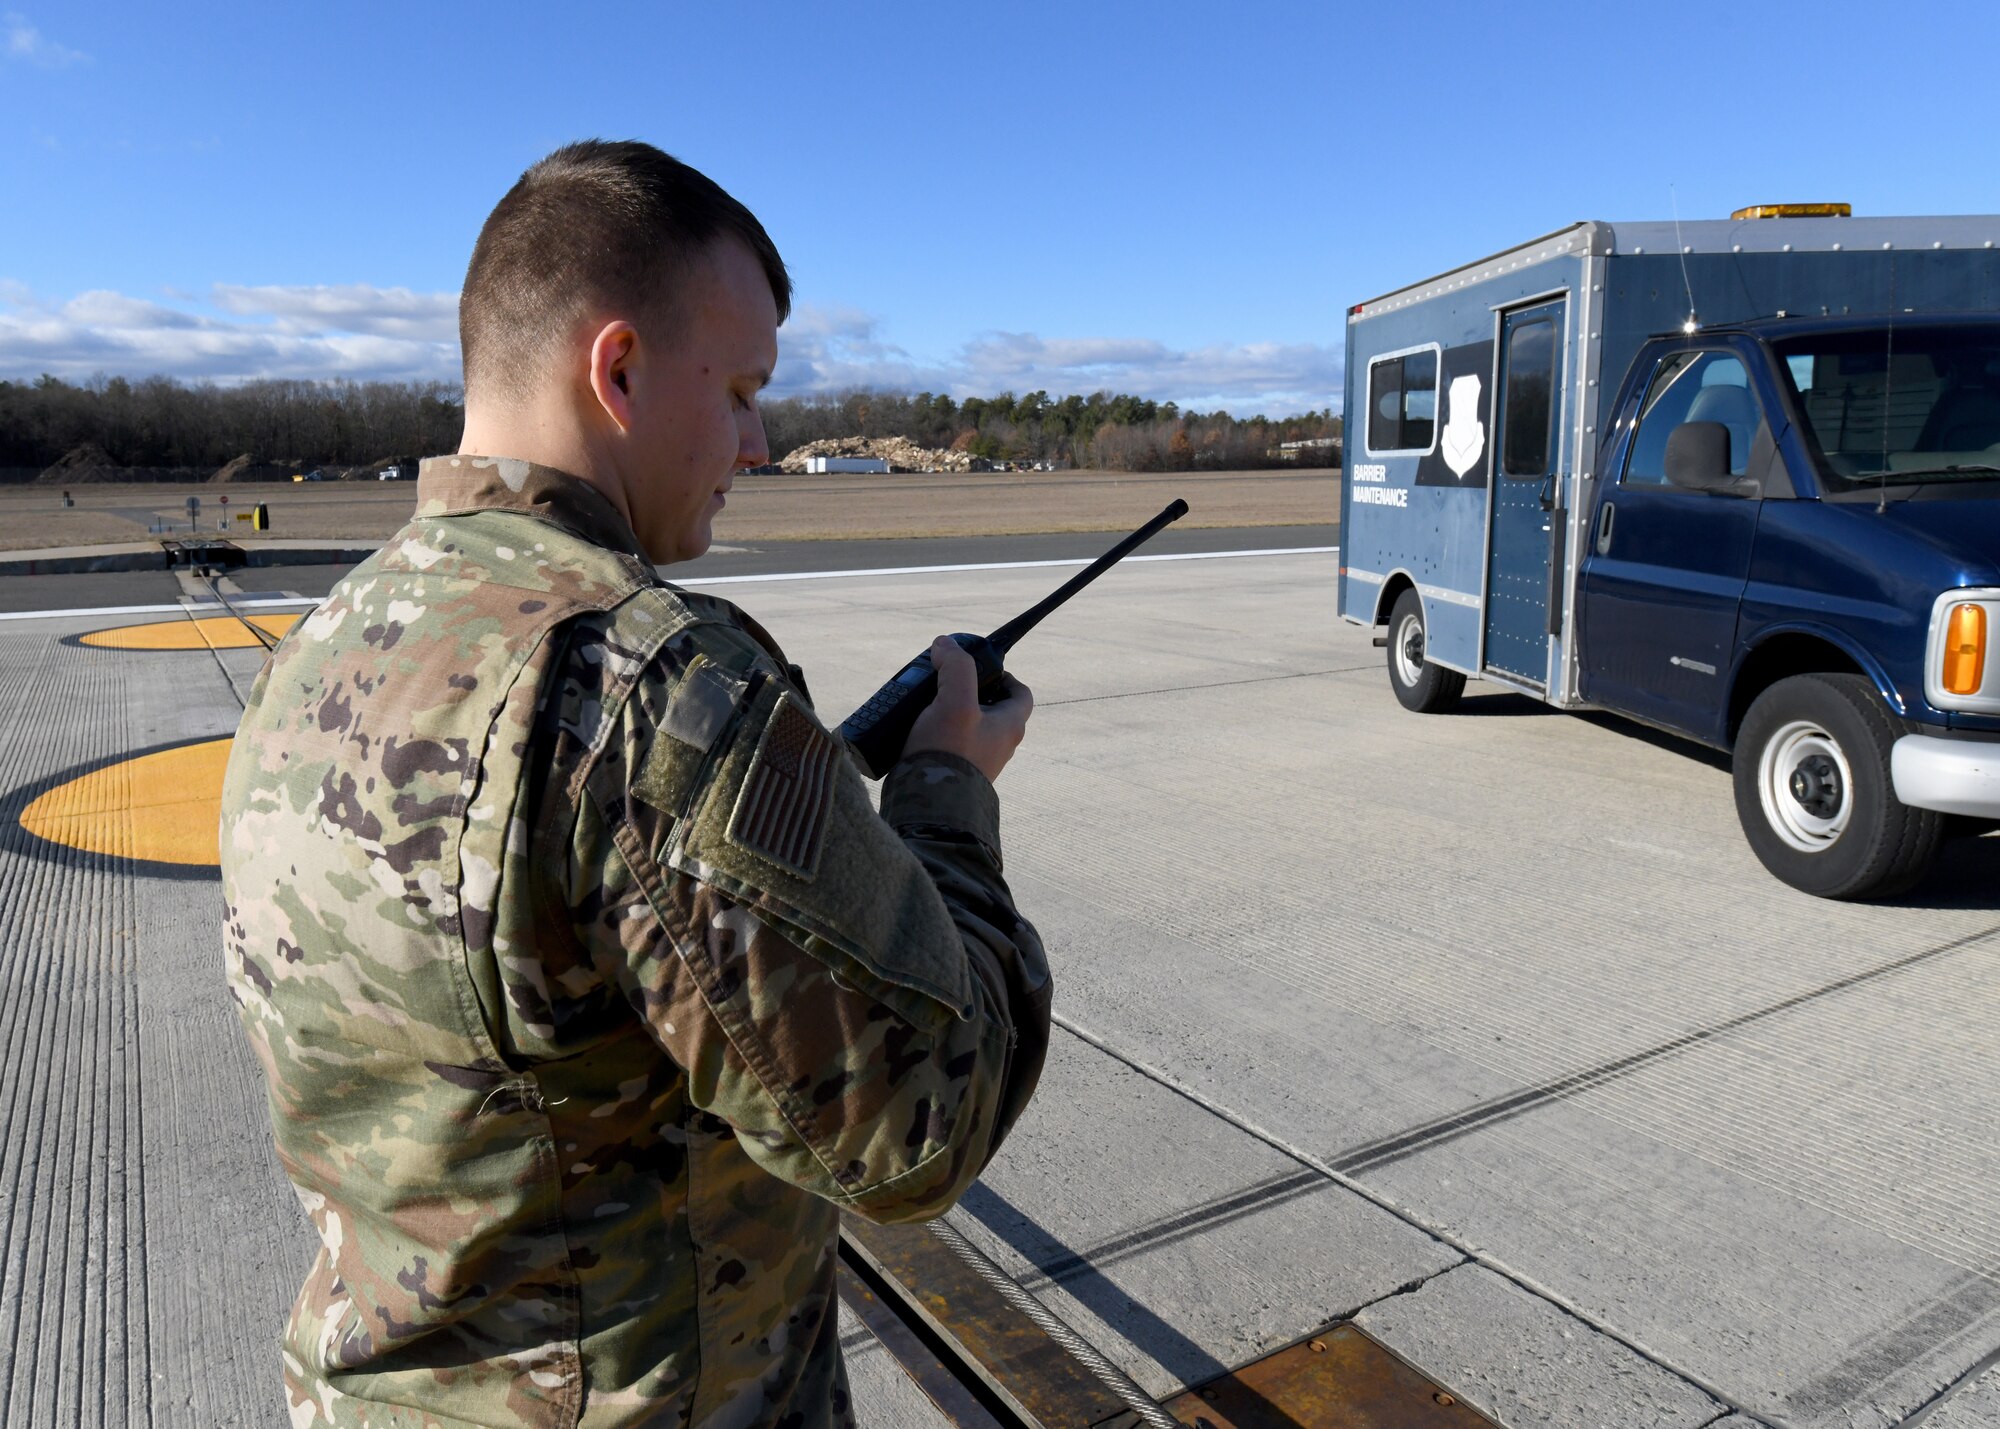 Tech. Sgt. Michael Reniewicz, 104th Fighter Wing power production shop leader, speaks with the control tower to lower the arresting cables at Barnes Air National Guard Base December 10, 2020. The arresting cables safely catch aircraft in the event of an engine malfunction or rejected takeoff. (U.S. Air National Guard Photo by Airman 1st Class Camille Lienau)